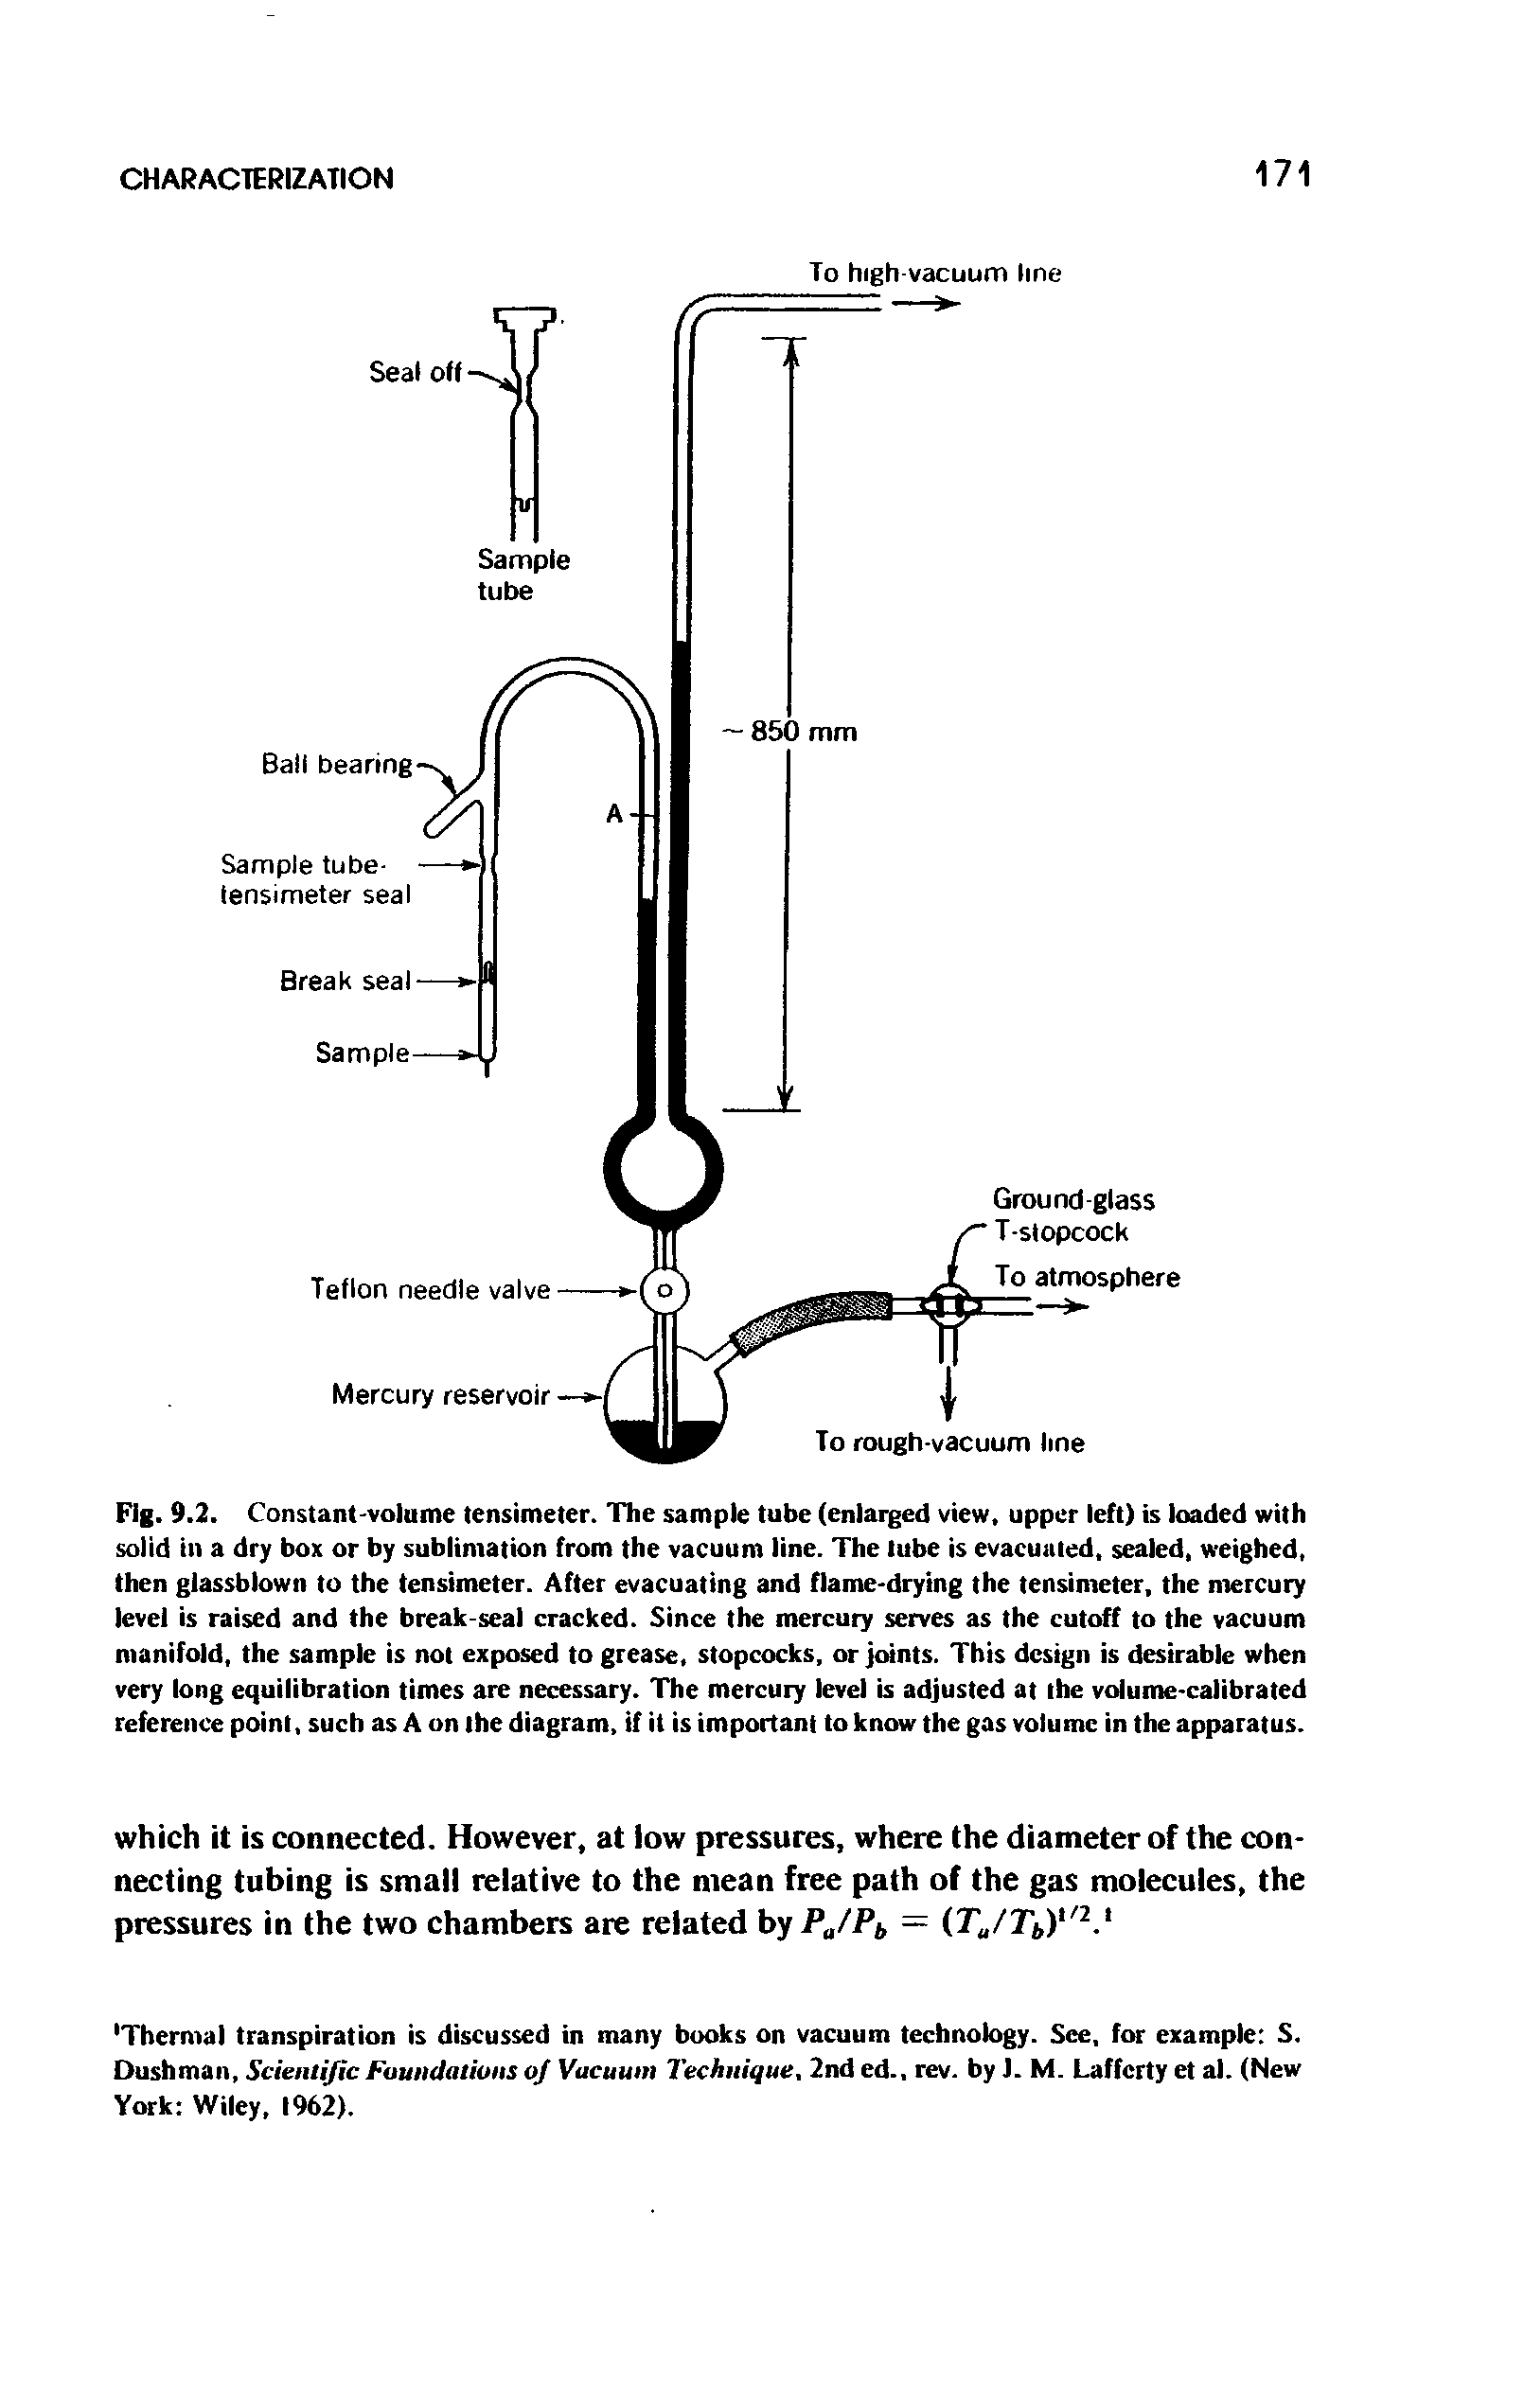 Fig. 9.2. Constant-volume tensimeter. The sample tube (enlarged view, upper left) is loaded with solid in a dry box or by sublimation from the vacuum line. The lube is evacuated, sealed, weighed, then glassblown to the tensimeter. After evacuating and flame-drying the tensimeter, the mercury level is raised and the break-seal cracked. Since the mercury serves as the cutoff to the vacuum manifold, the sample is not exposed to grease, stopcocks, or joints. This design is desirable when very long equilibration times are necessary. The mercury level is adjusted at the volume-calibrated reference point, such as A on (he diagram, if it is important to know the gas volume in the apparatus.